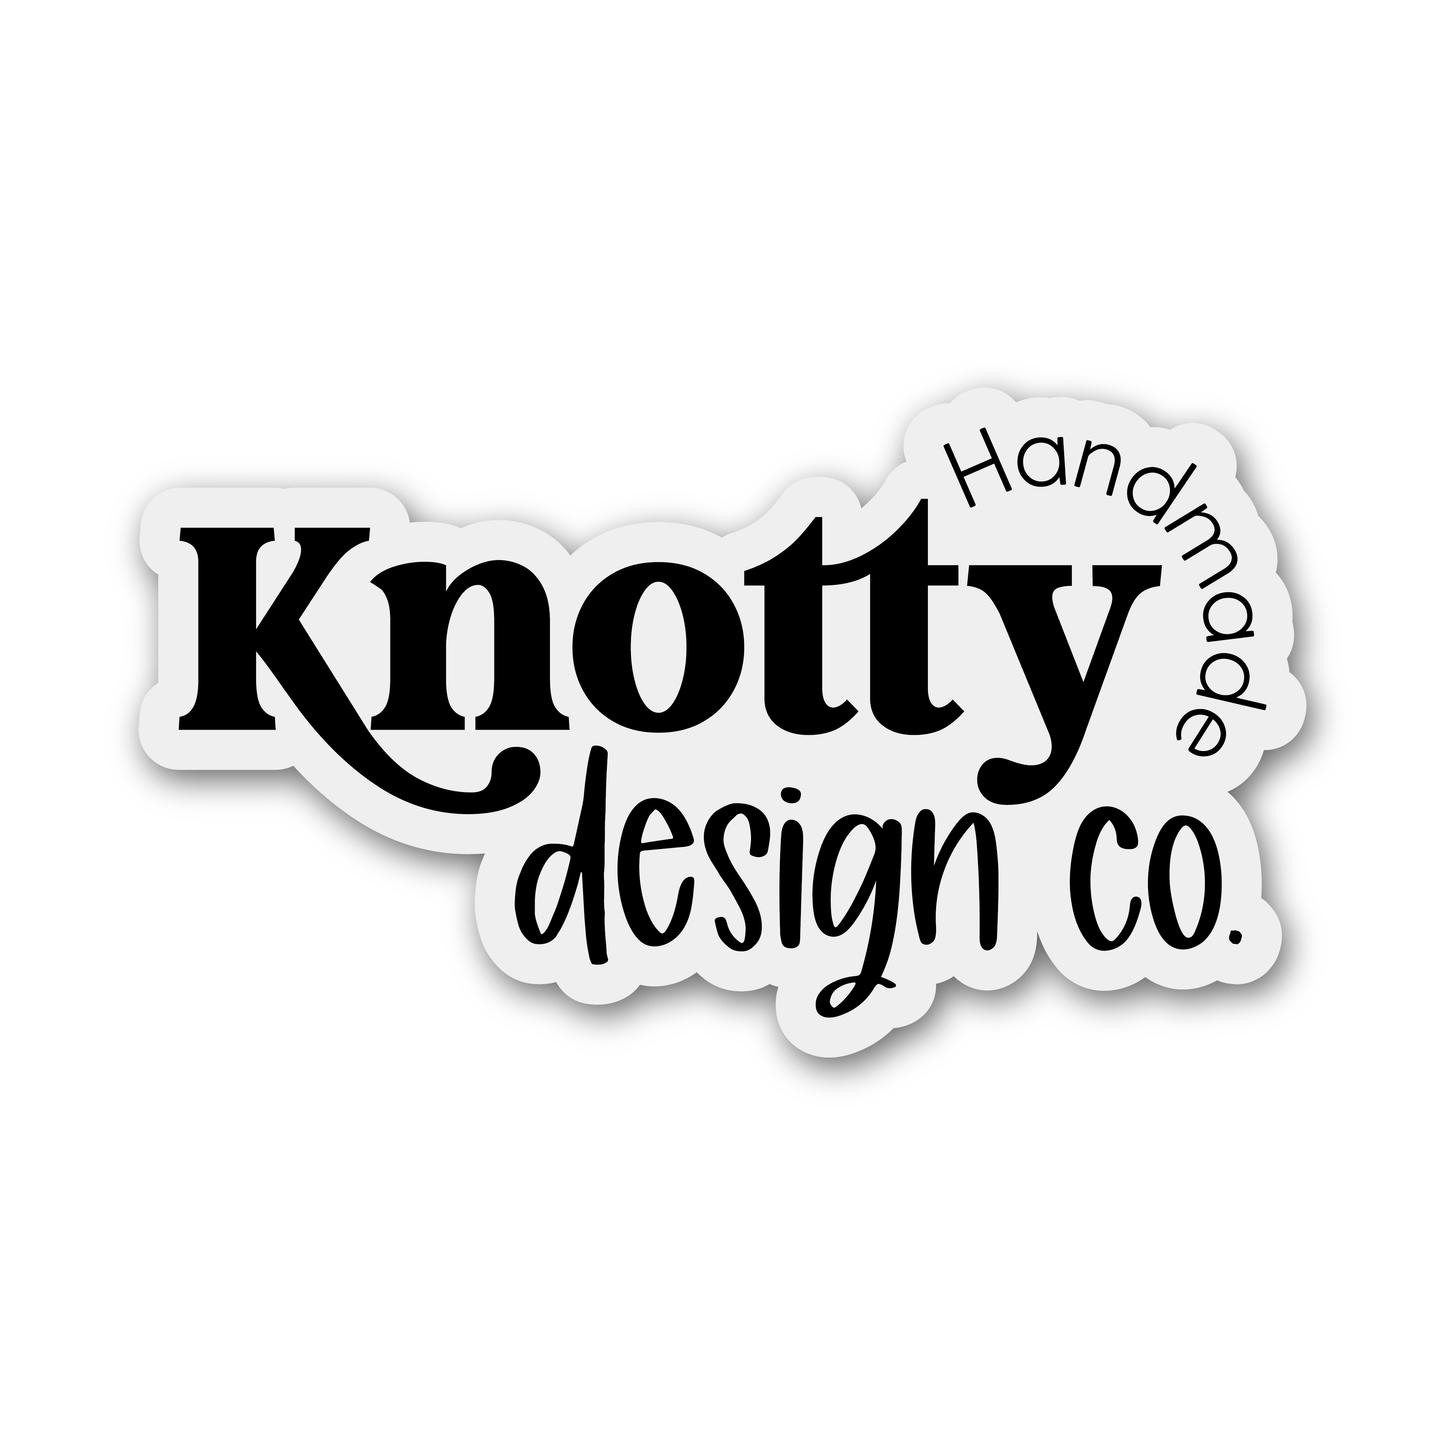 Die Cut Logo Magnet (Bulk Pricing Available)